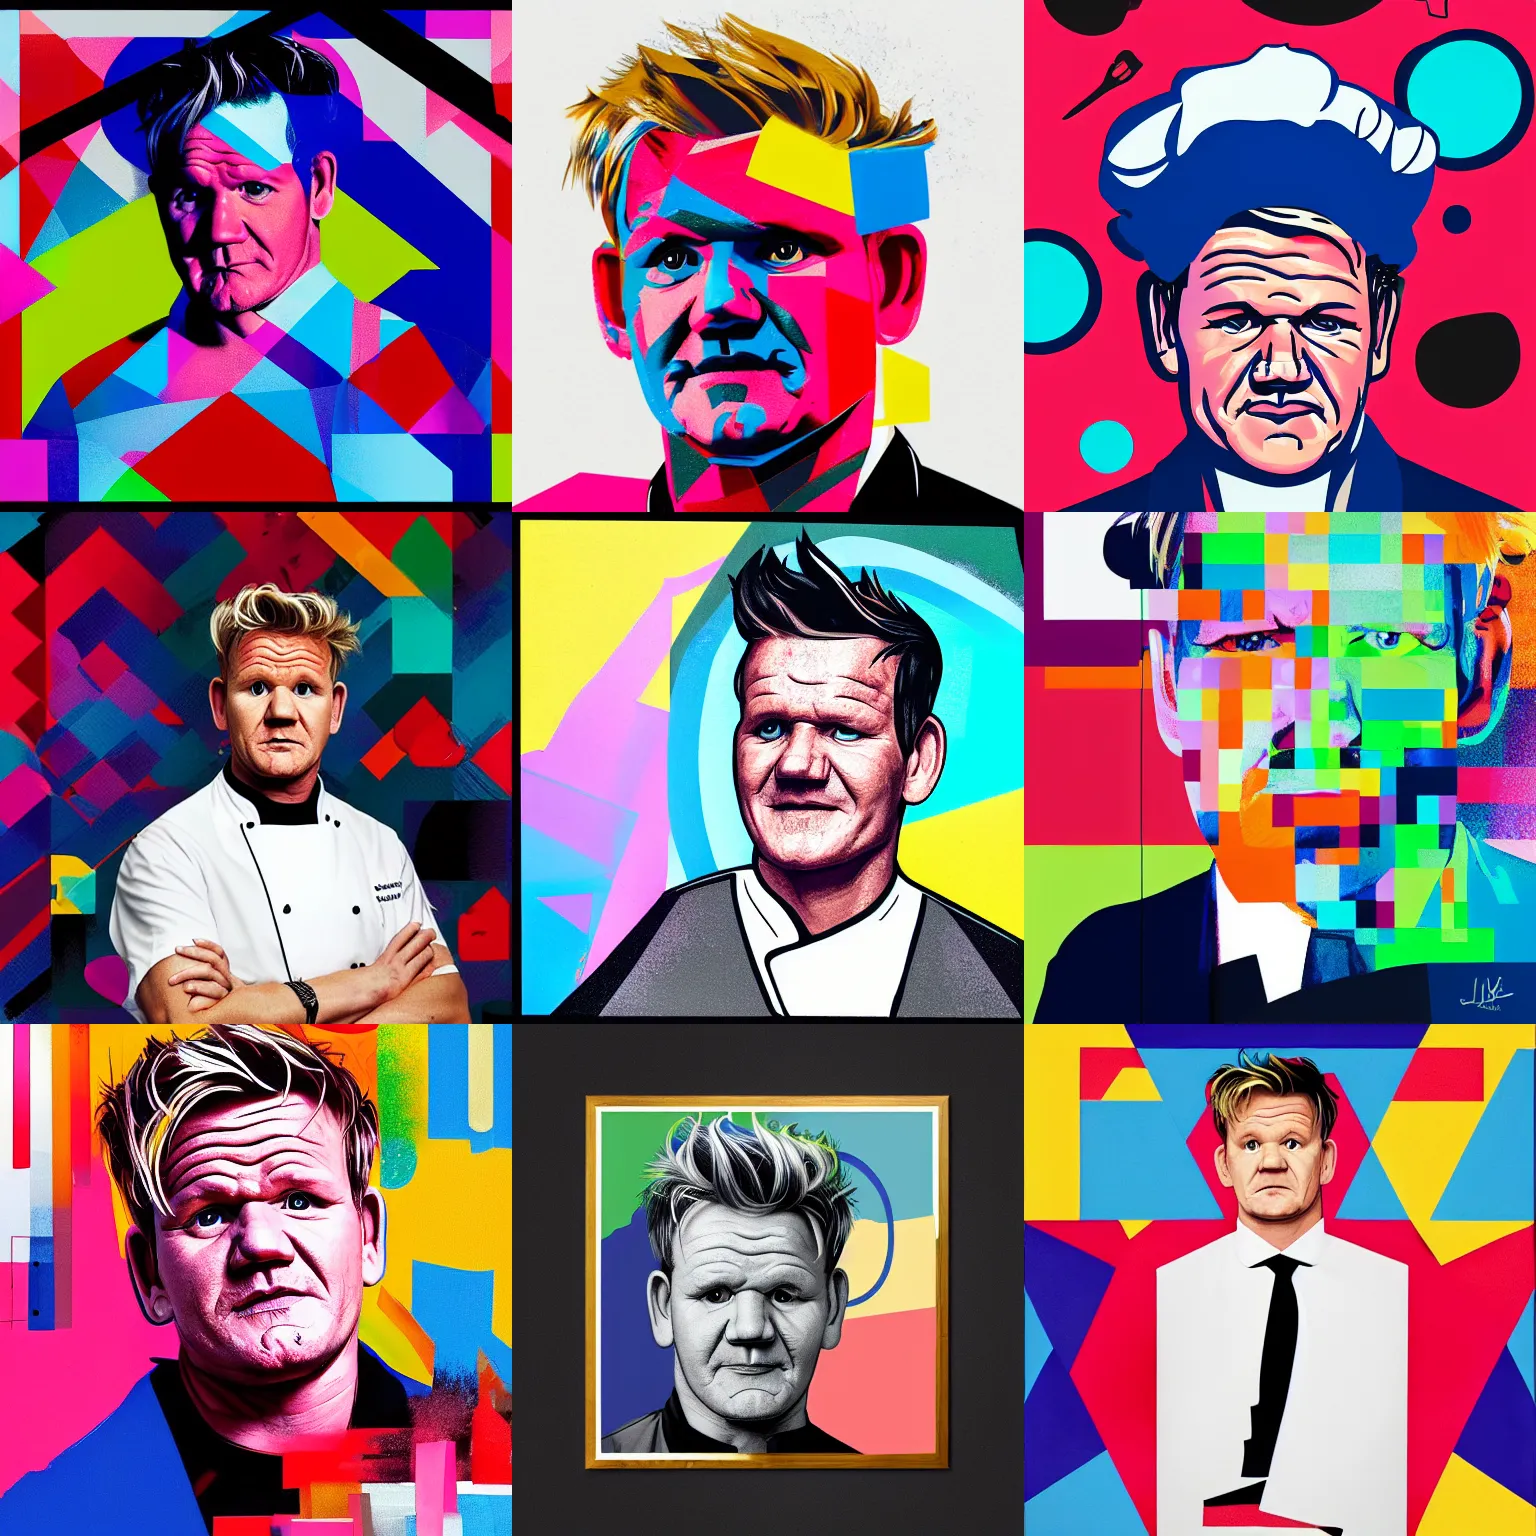 Prompt: A portrait of Gordon Ramsay in a chef uniform | geometric shapes, vibrant colors, spray paint, rounded corners